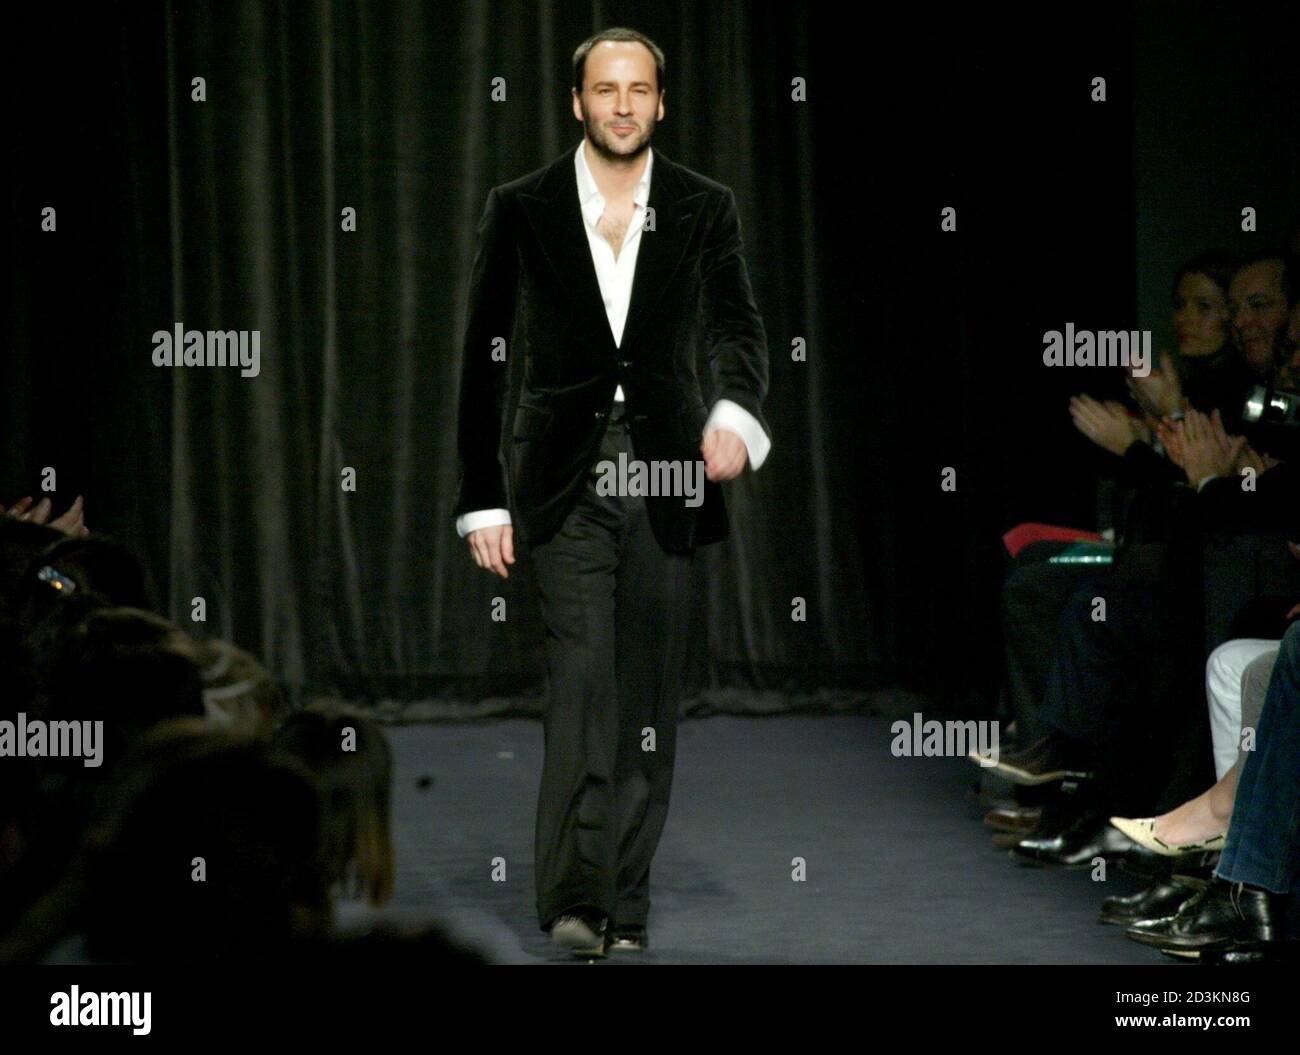 AMERICAN DESIGNER TOM FORD WALKS ON THE CATWALK AFTER HIS SHOW FOR YVES  SAINT LAURENT RIVE GAUCHE FASHION HOUSE IN PARIS Stock Photo - Alamy